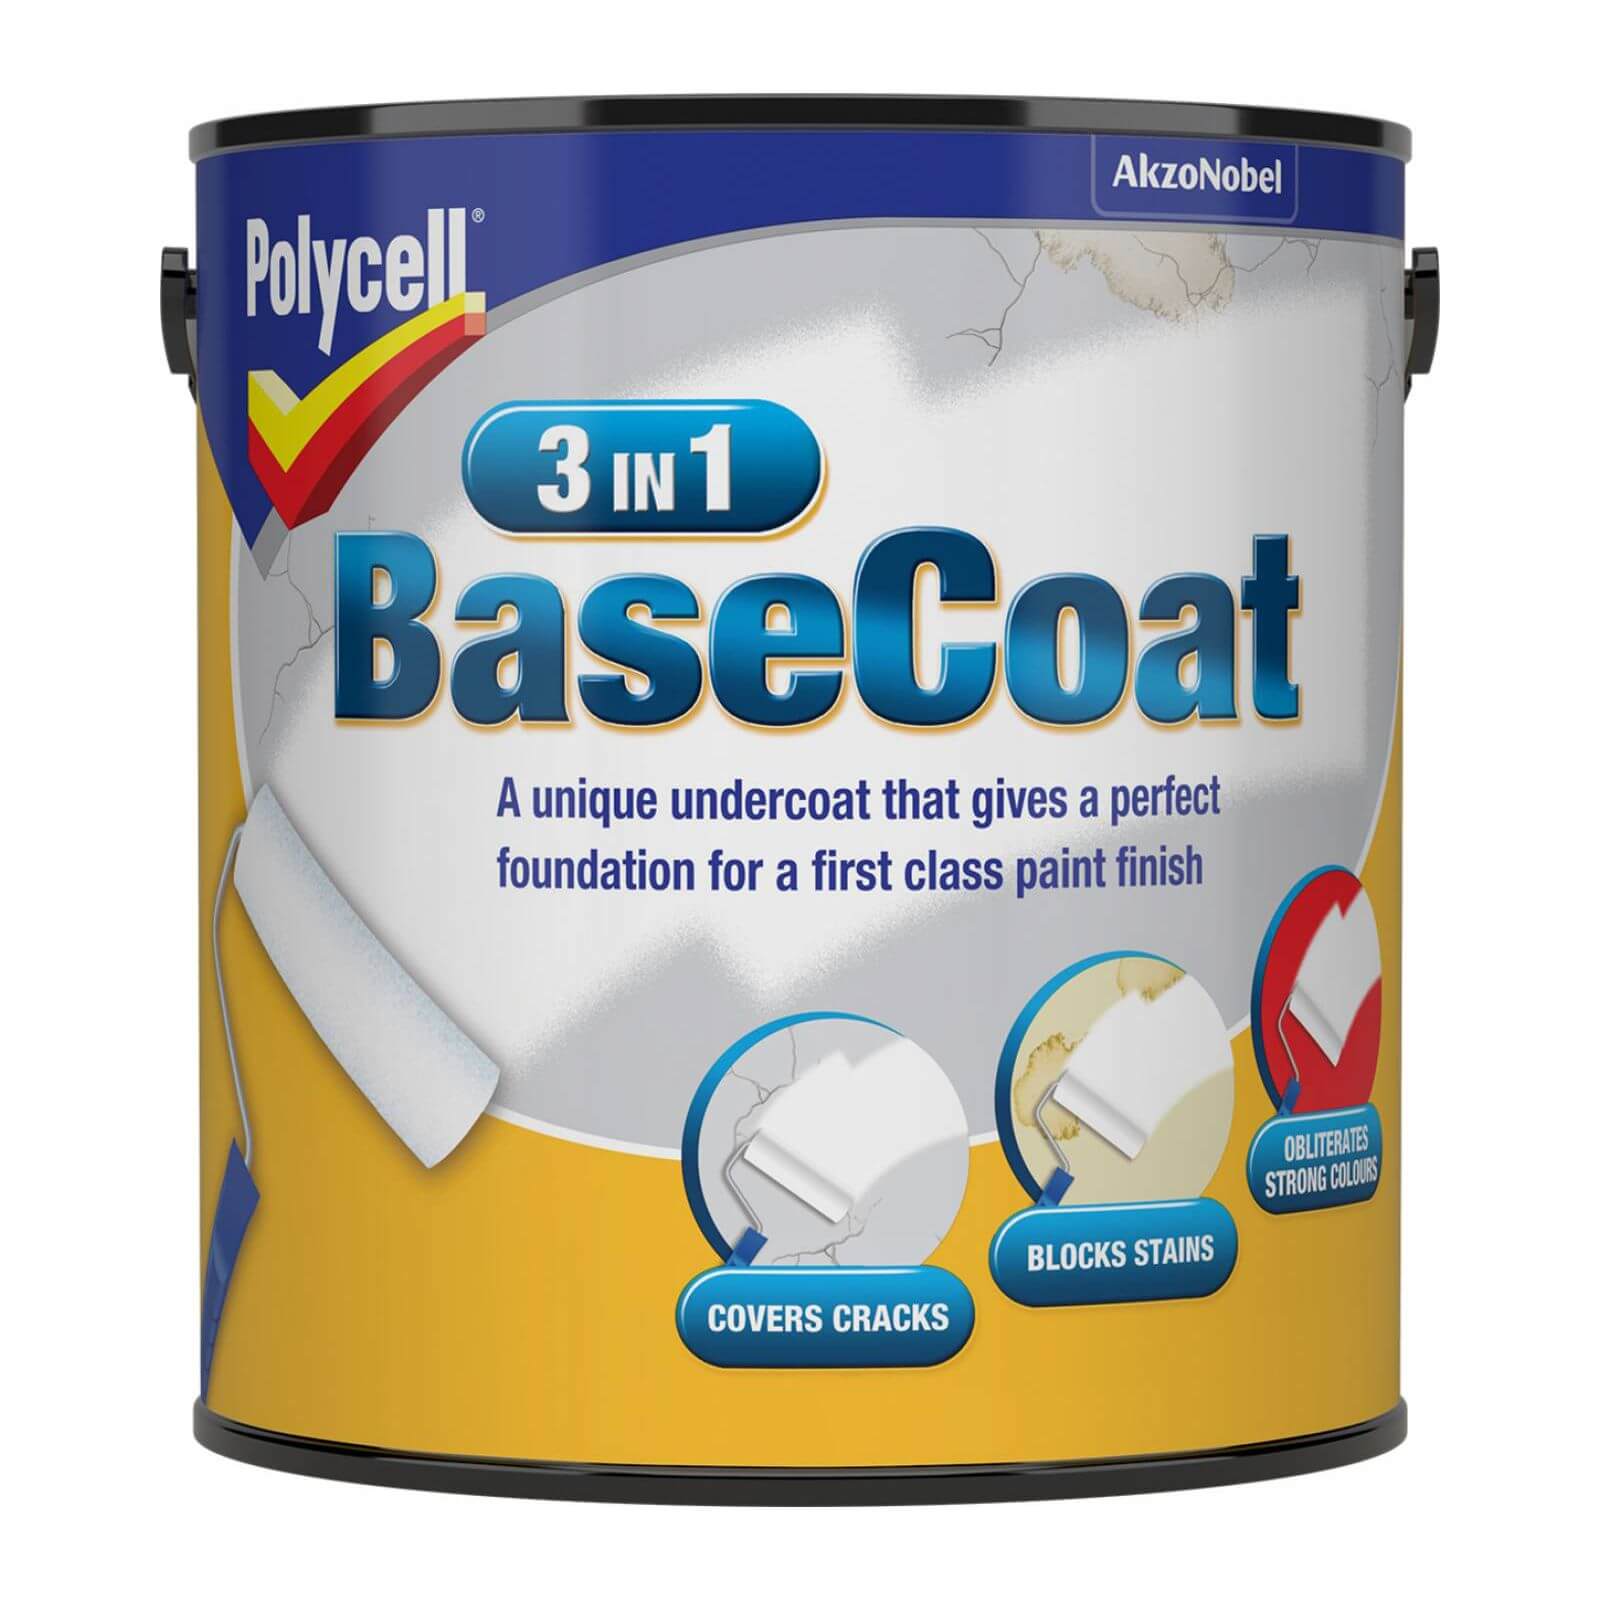 Polycell 3 in 1 Basecoat - 2.5L